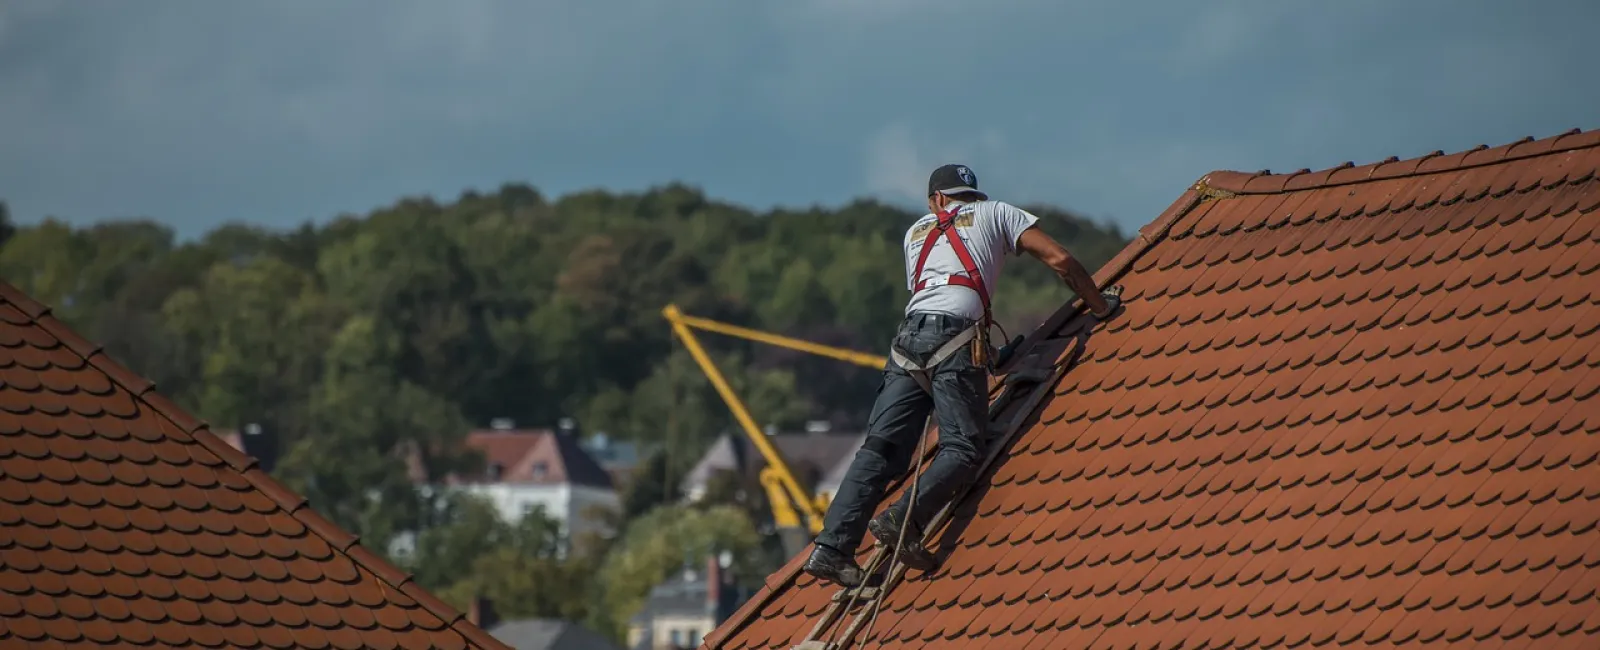 5 Reasons You Should Schedule a Roof Inspection Today